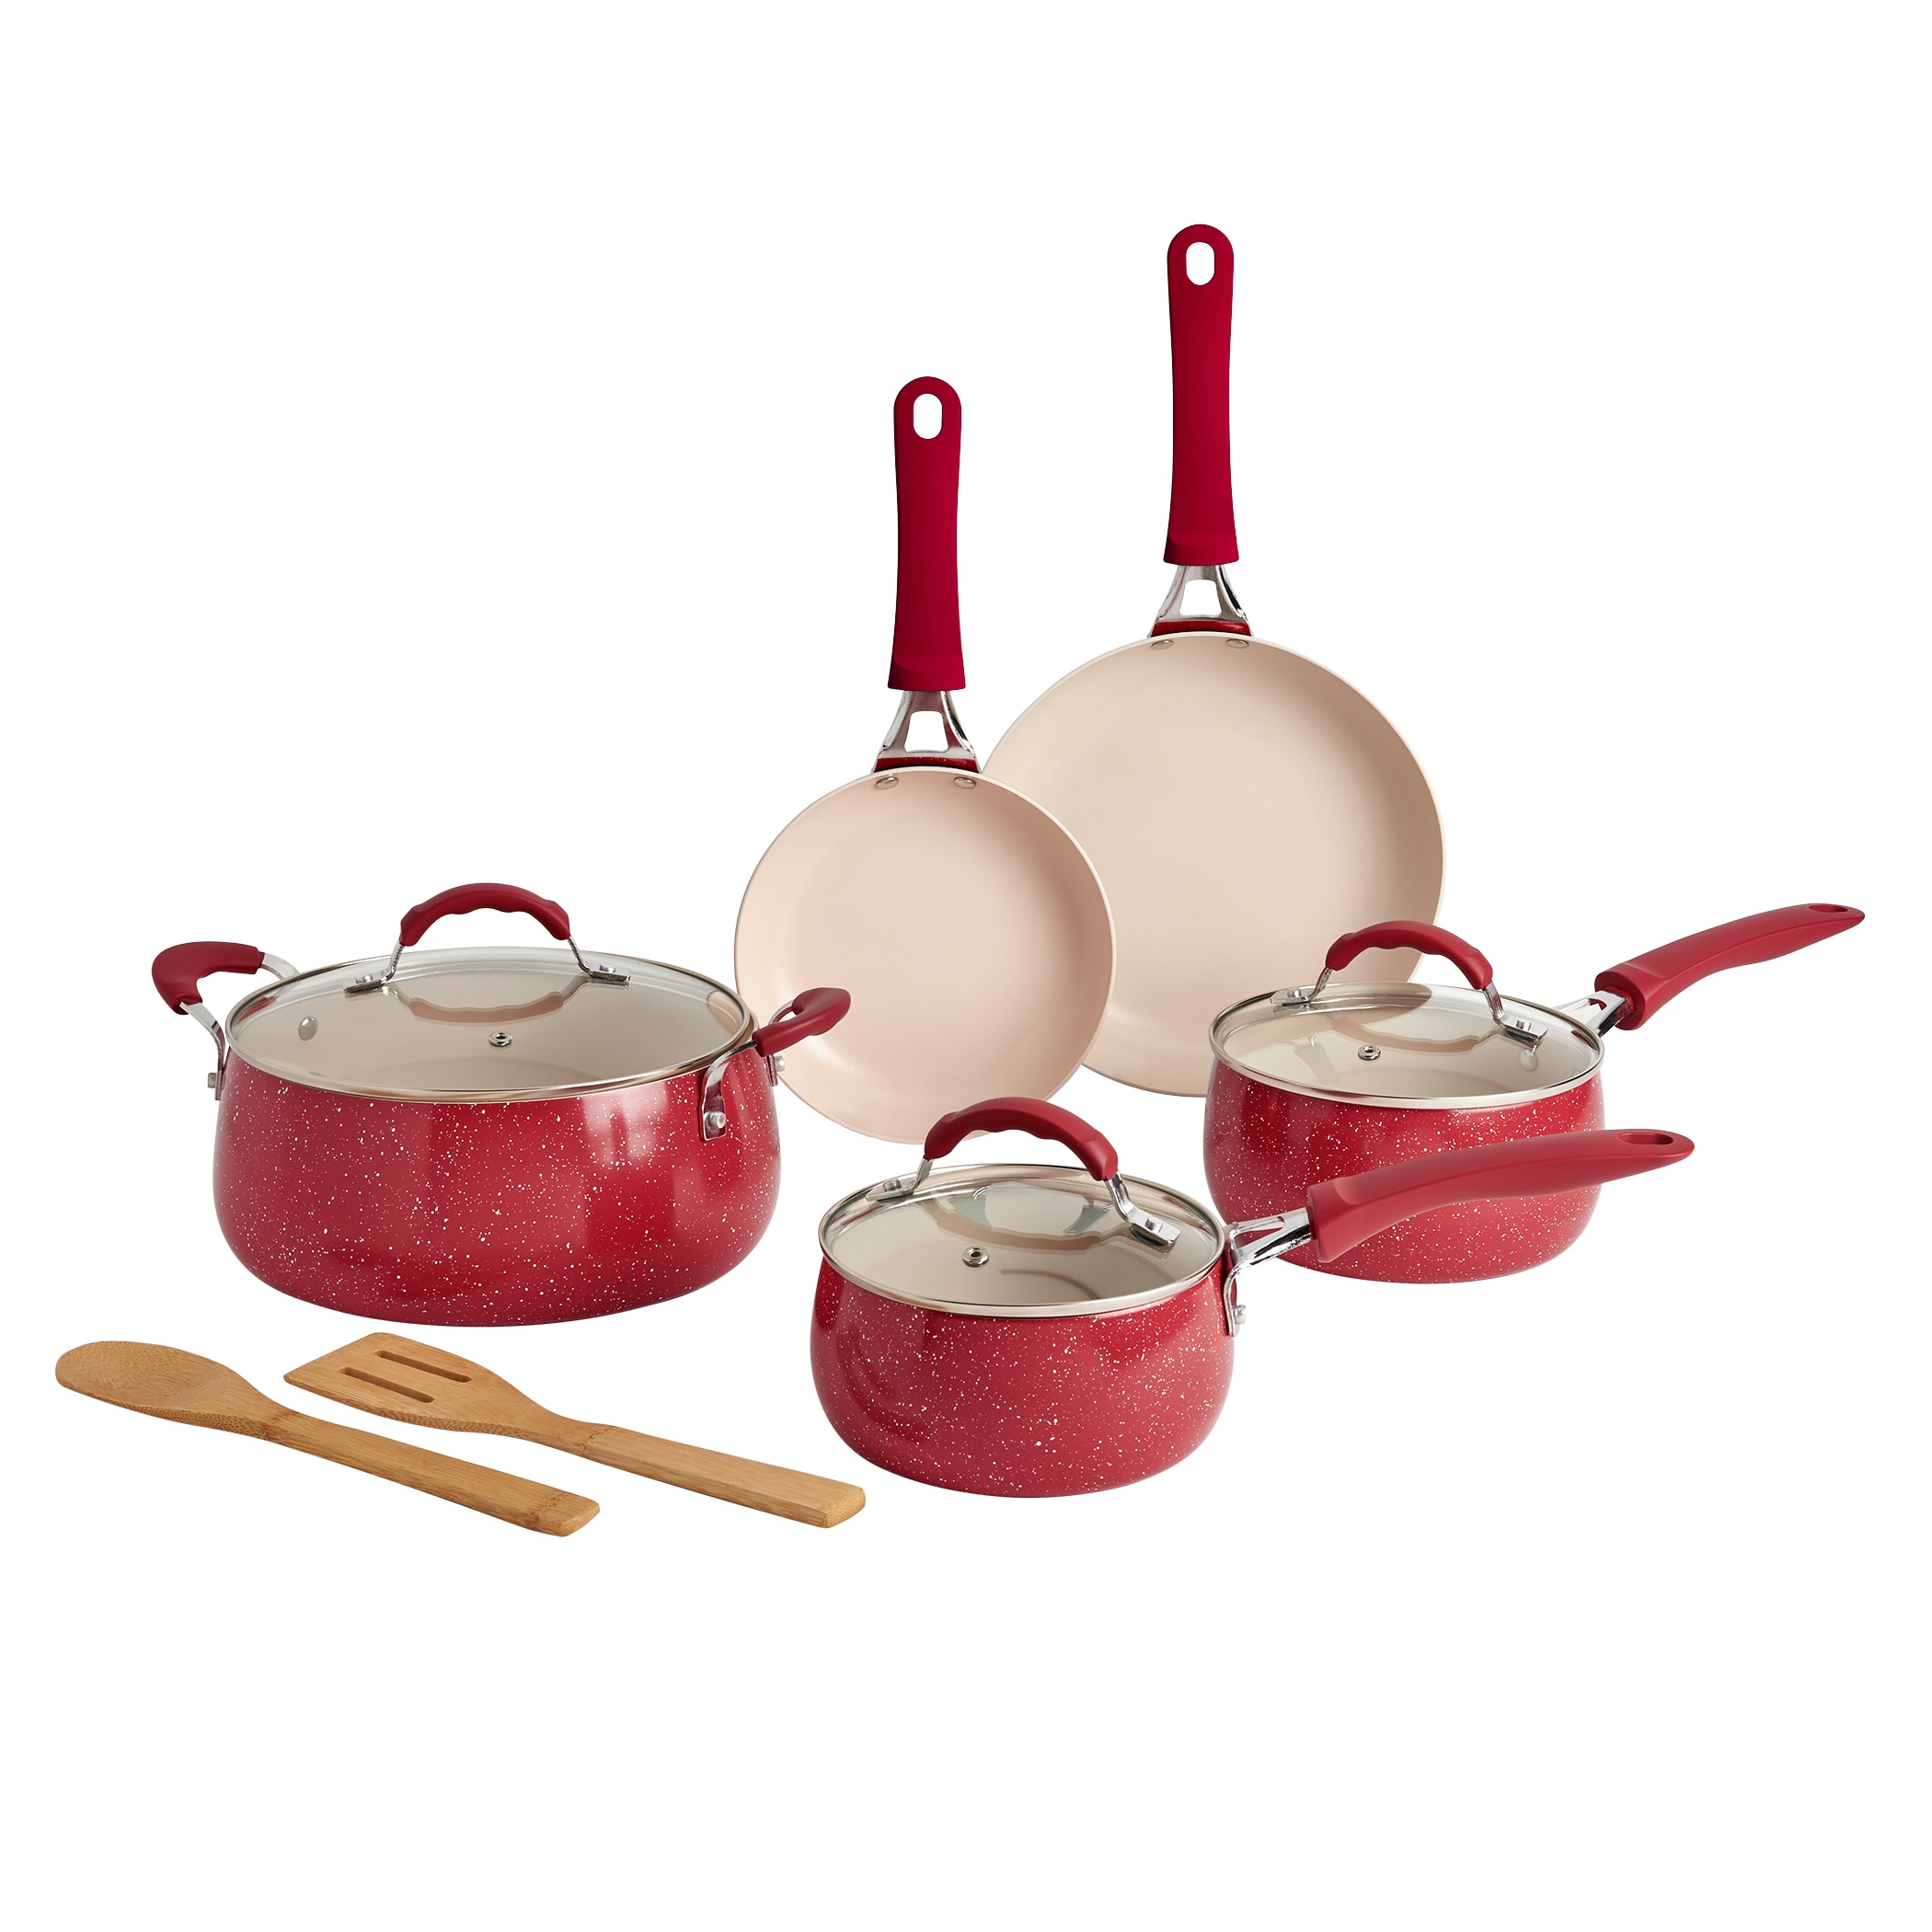 NON STICK Cookware Set New RED 18 PIECE Pots and Pans Aluminum Professional  Kit